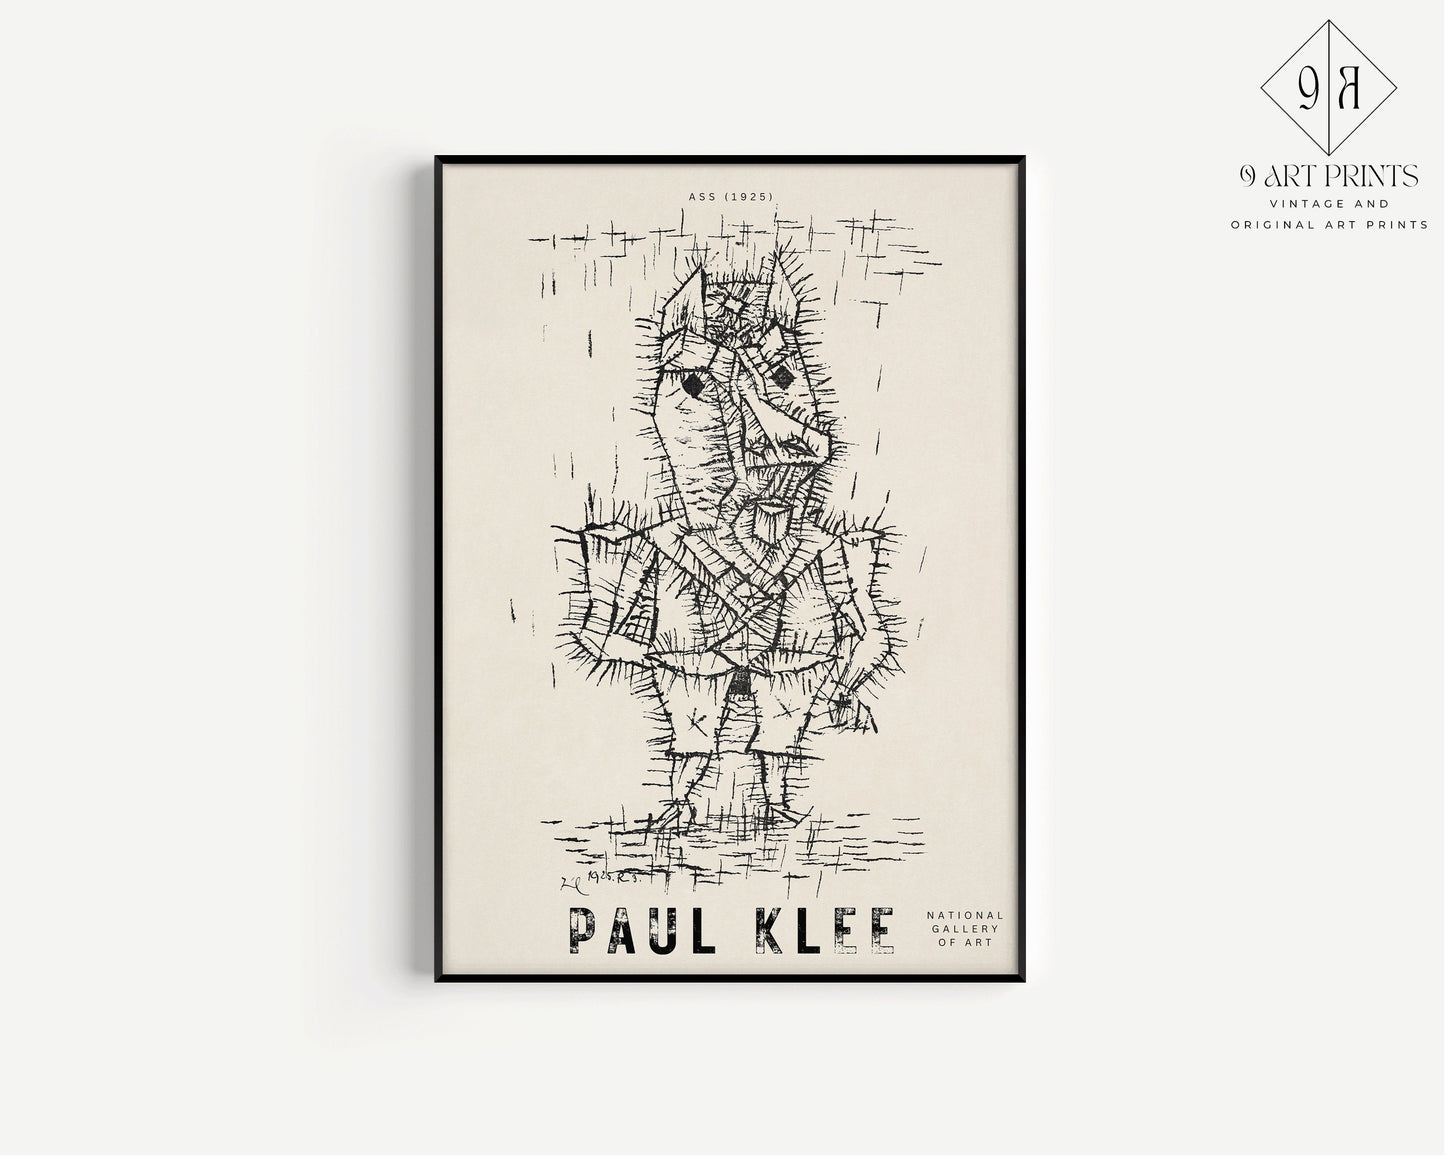 Paul Klee THE ASS Poster Bauhaus Exhibition Poster Abstract Gallery Print Framed Ready to Hang Home Office Decor Museum Print